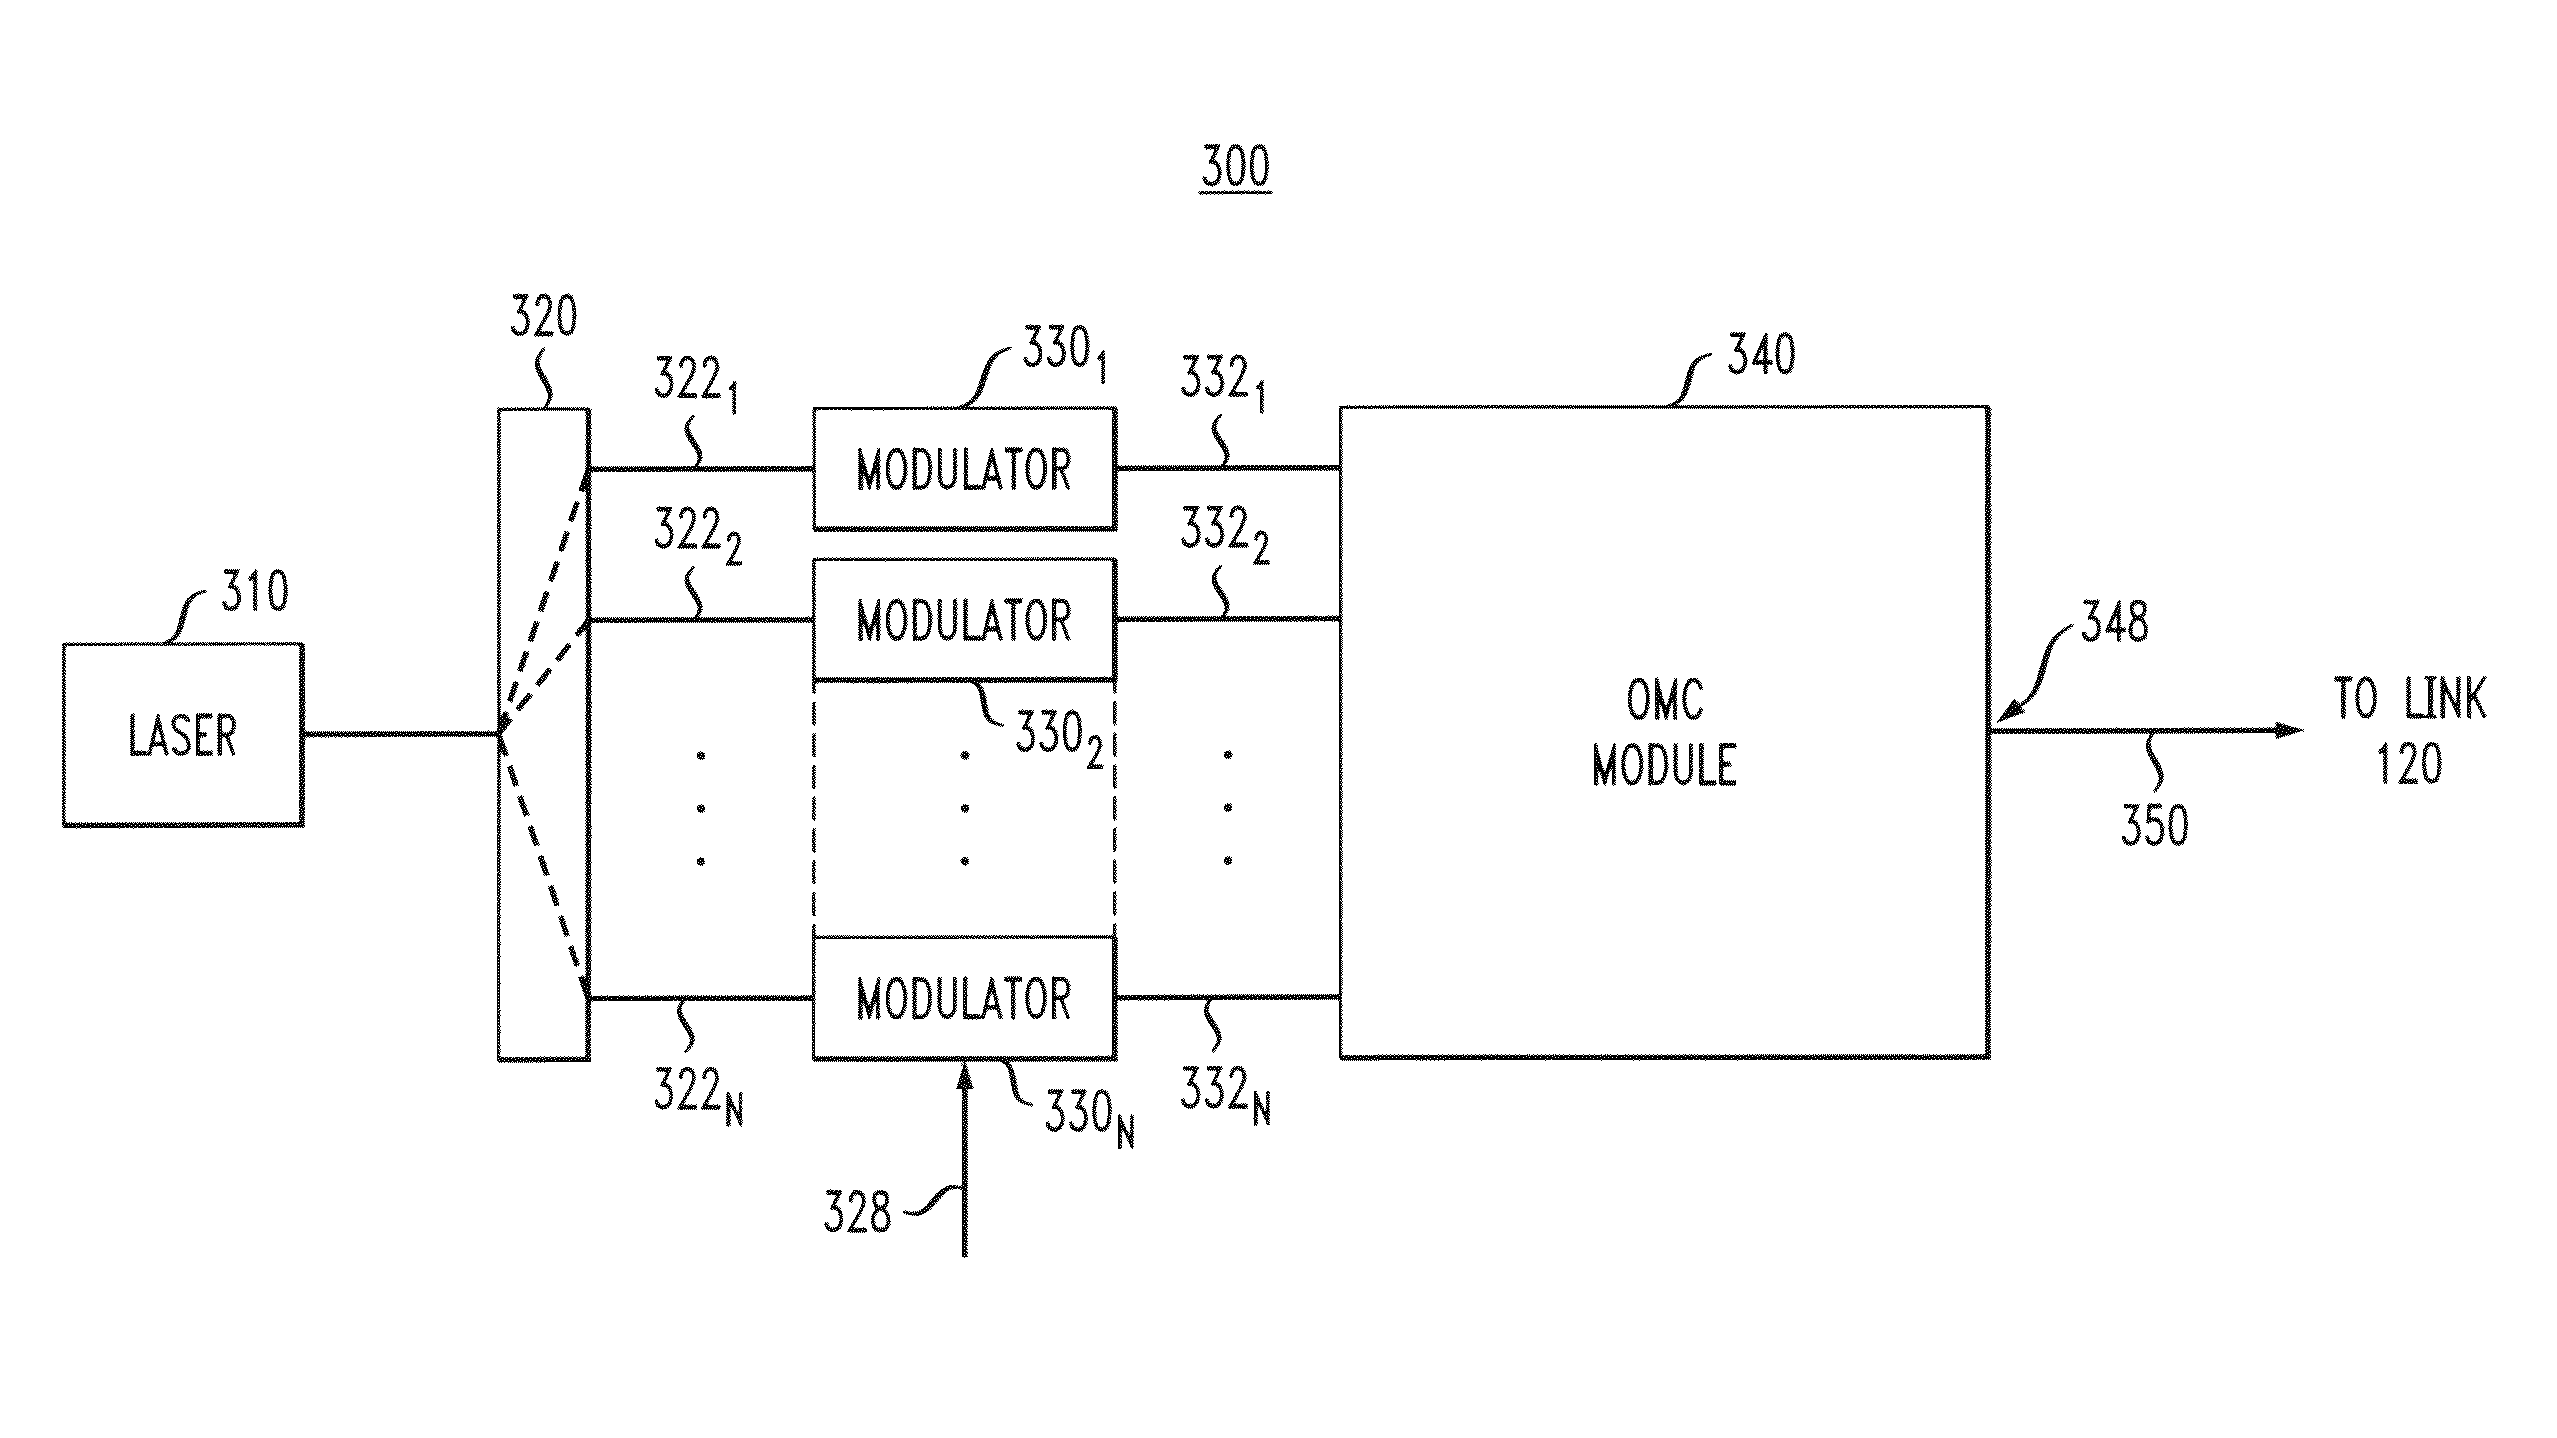 Transverse-mode multiplexing for optical communication systems